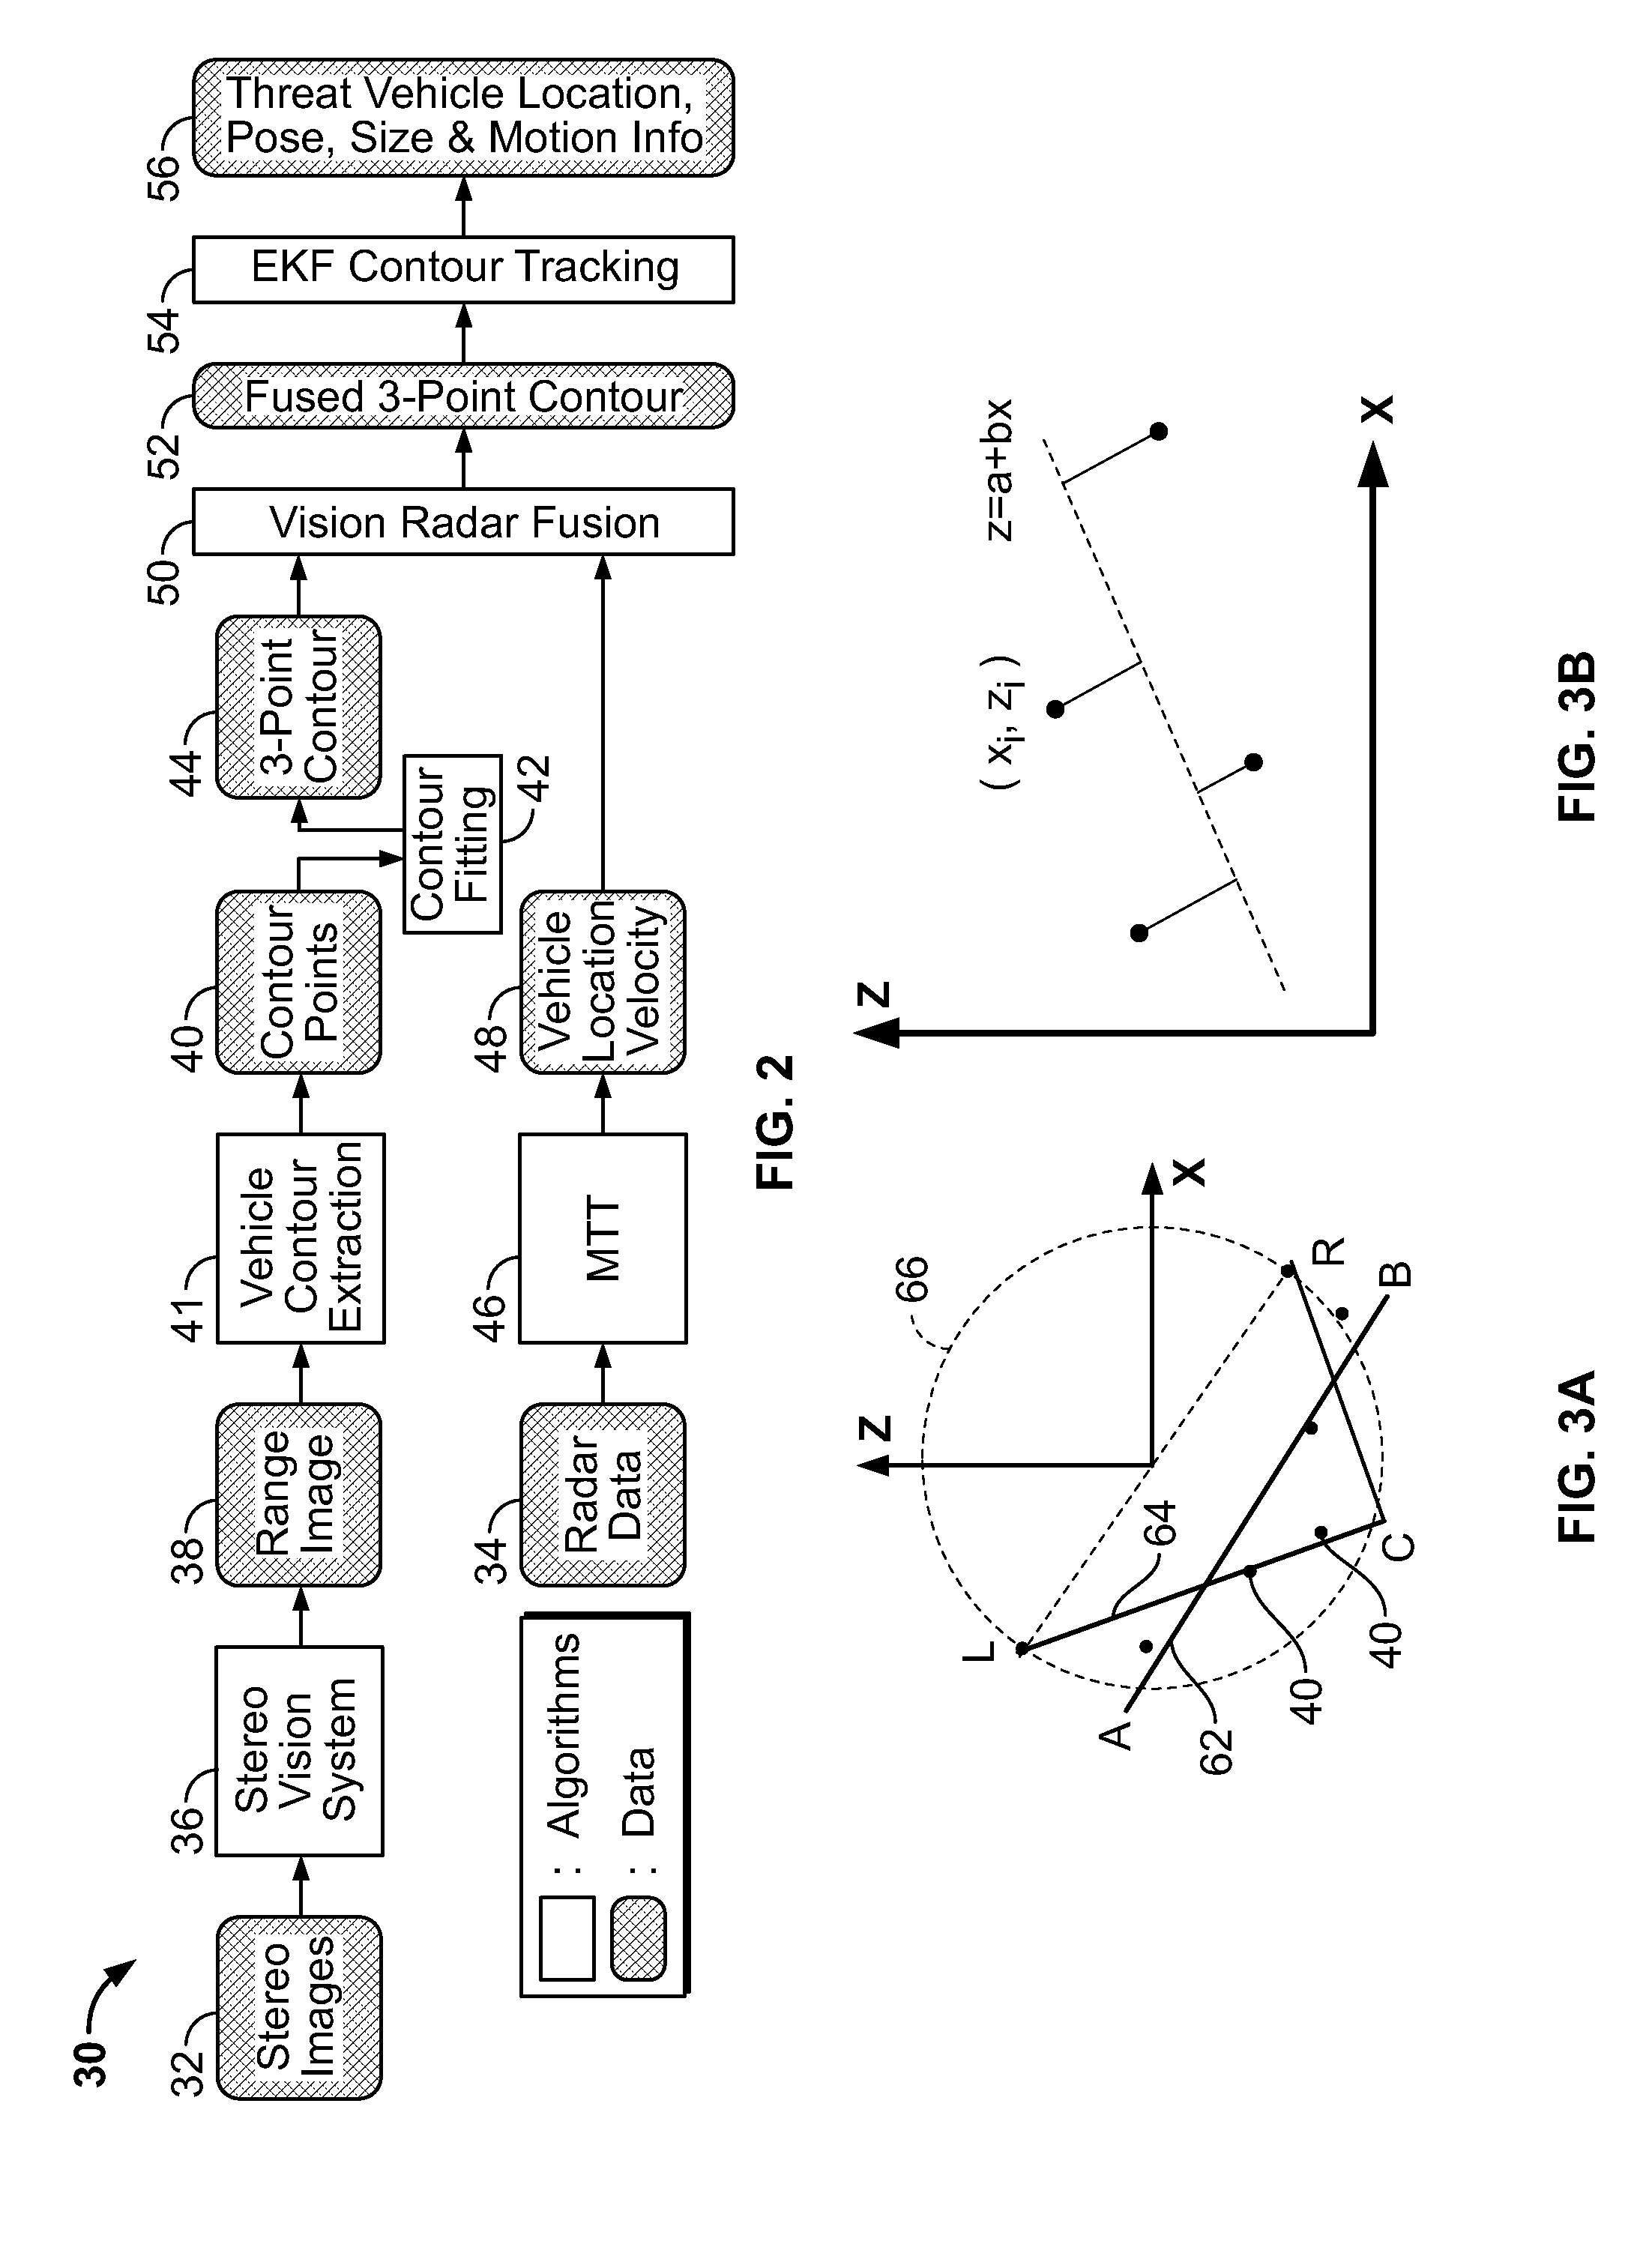 Collision avoidance method and system using stereo vision and radar sensor fusion